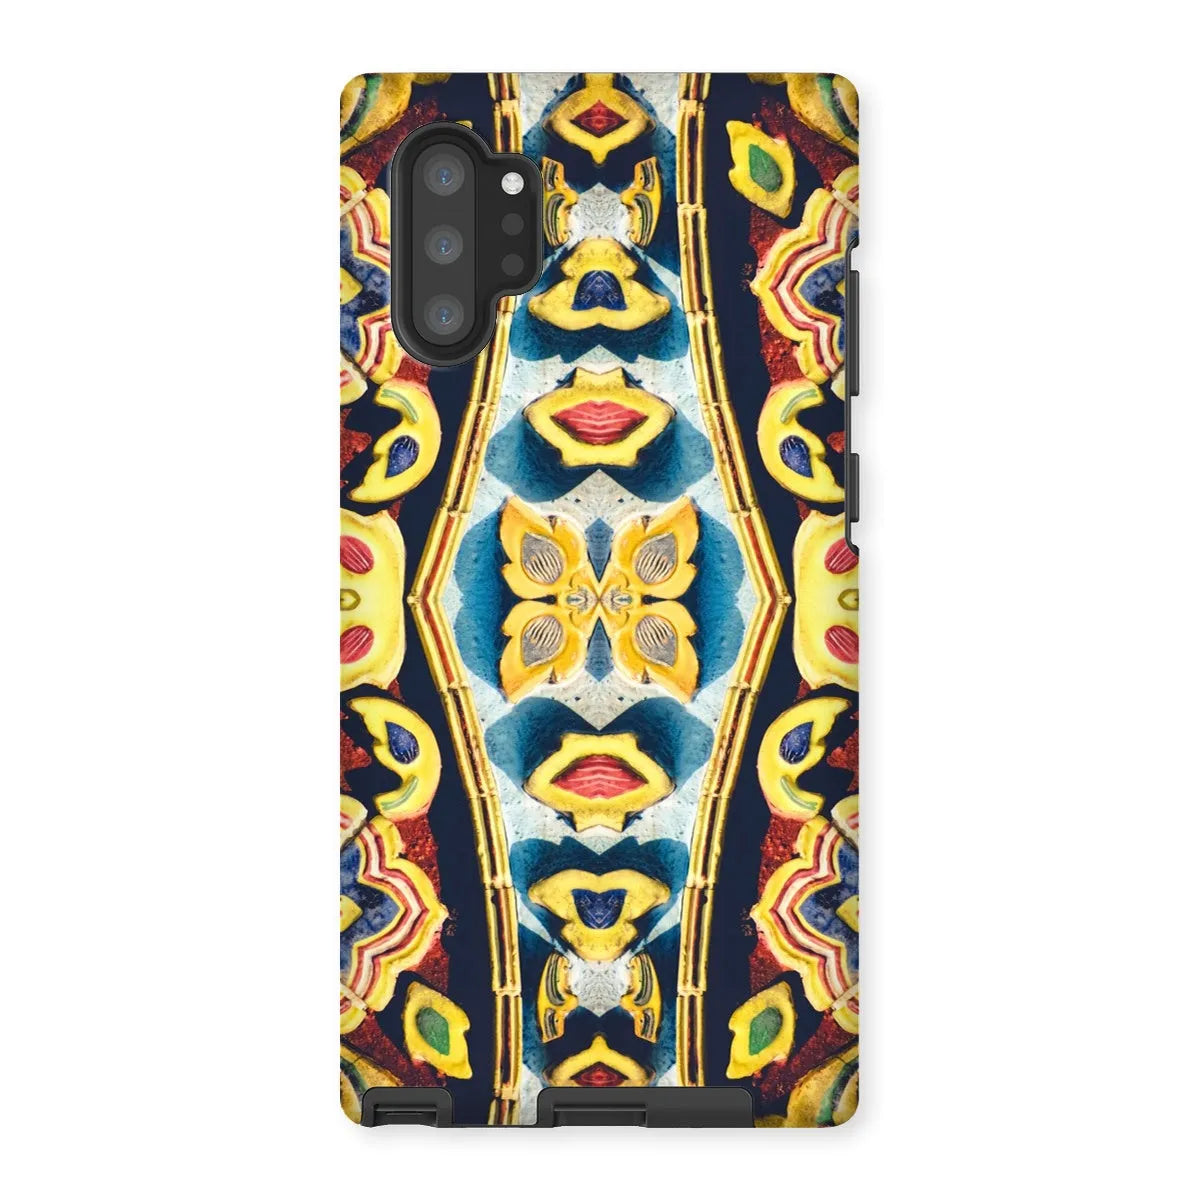 Masala Thai Aesthetic Mosaic Pattern Art Phone Case - Samsung Galaxy Note 10p / Matte - Mobile Phone Cases - Aesthetic